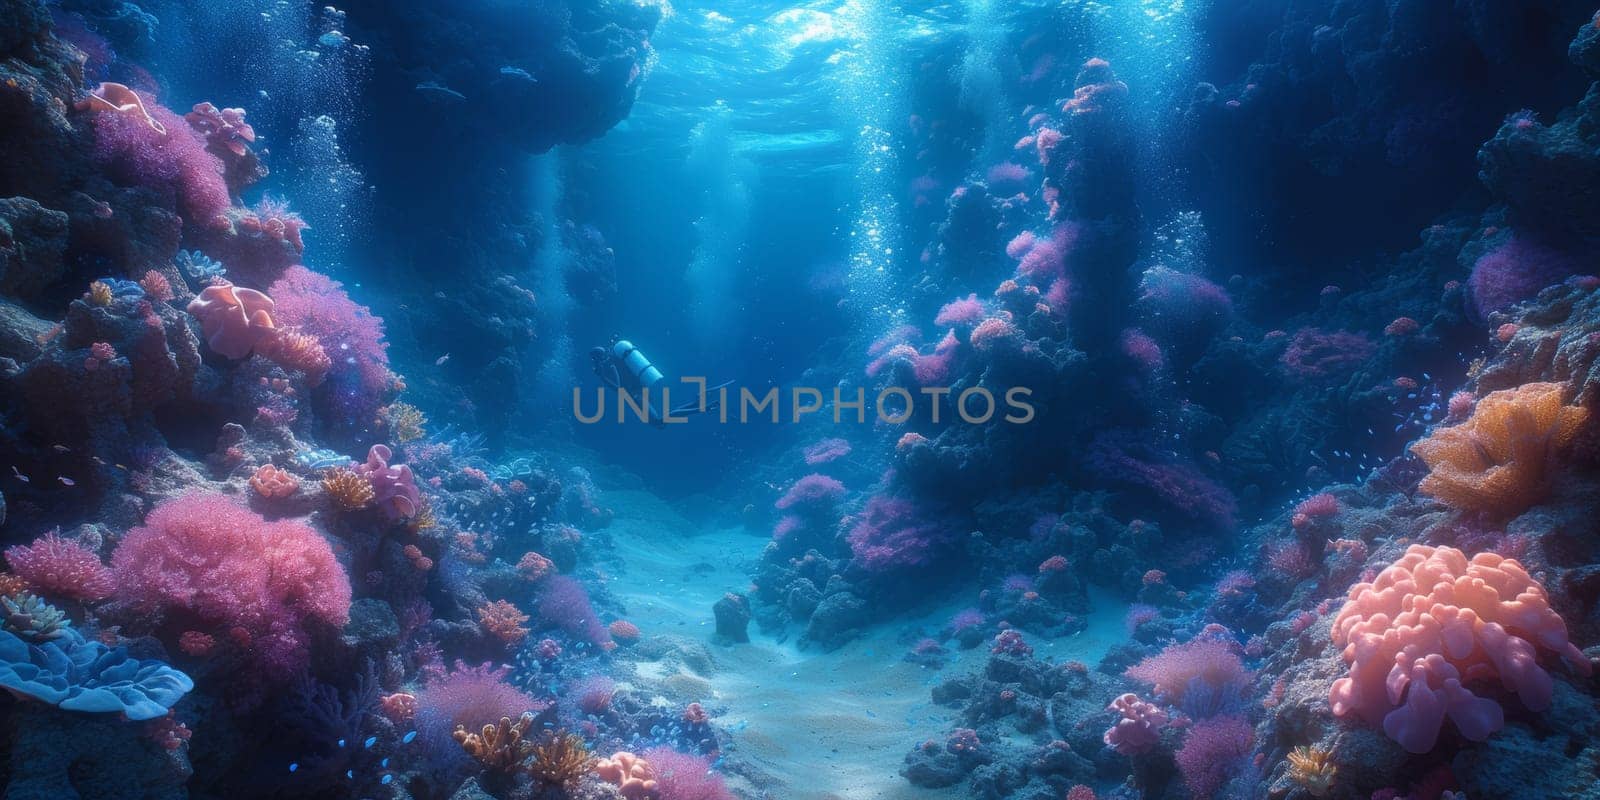 A diver is swimming through a coral reef filled with colorful fish